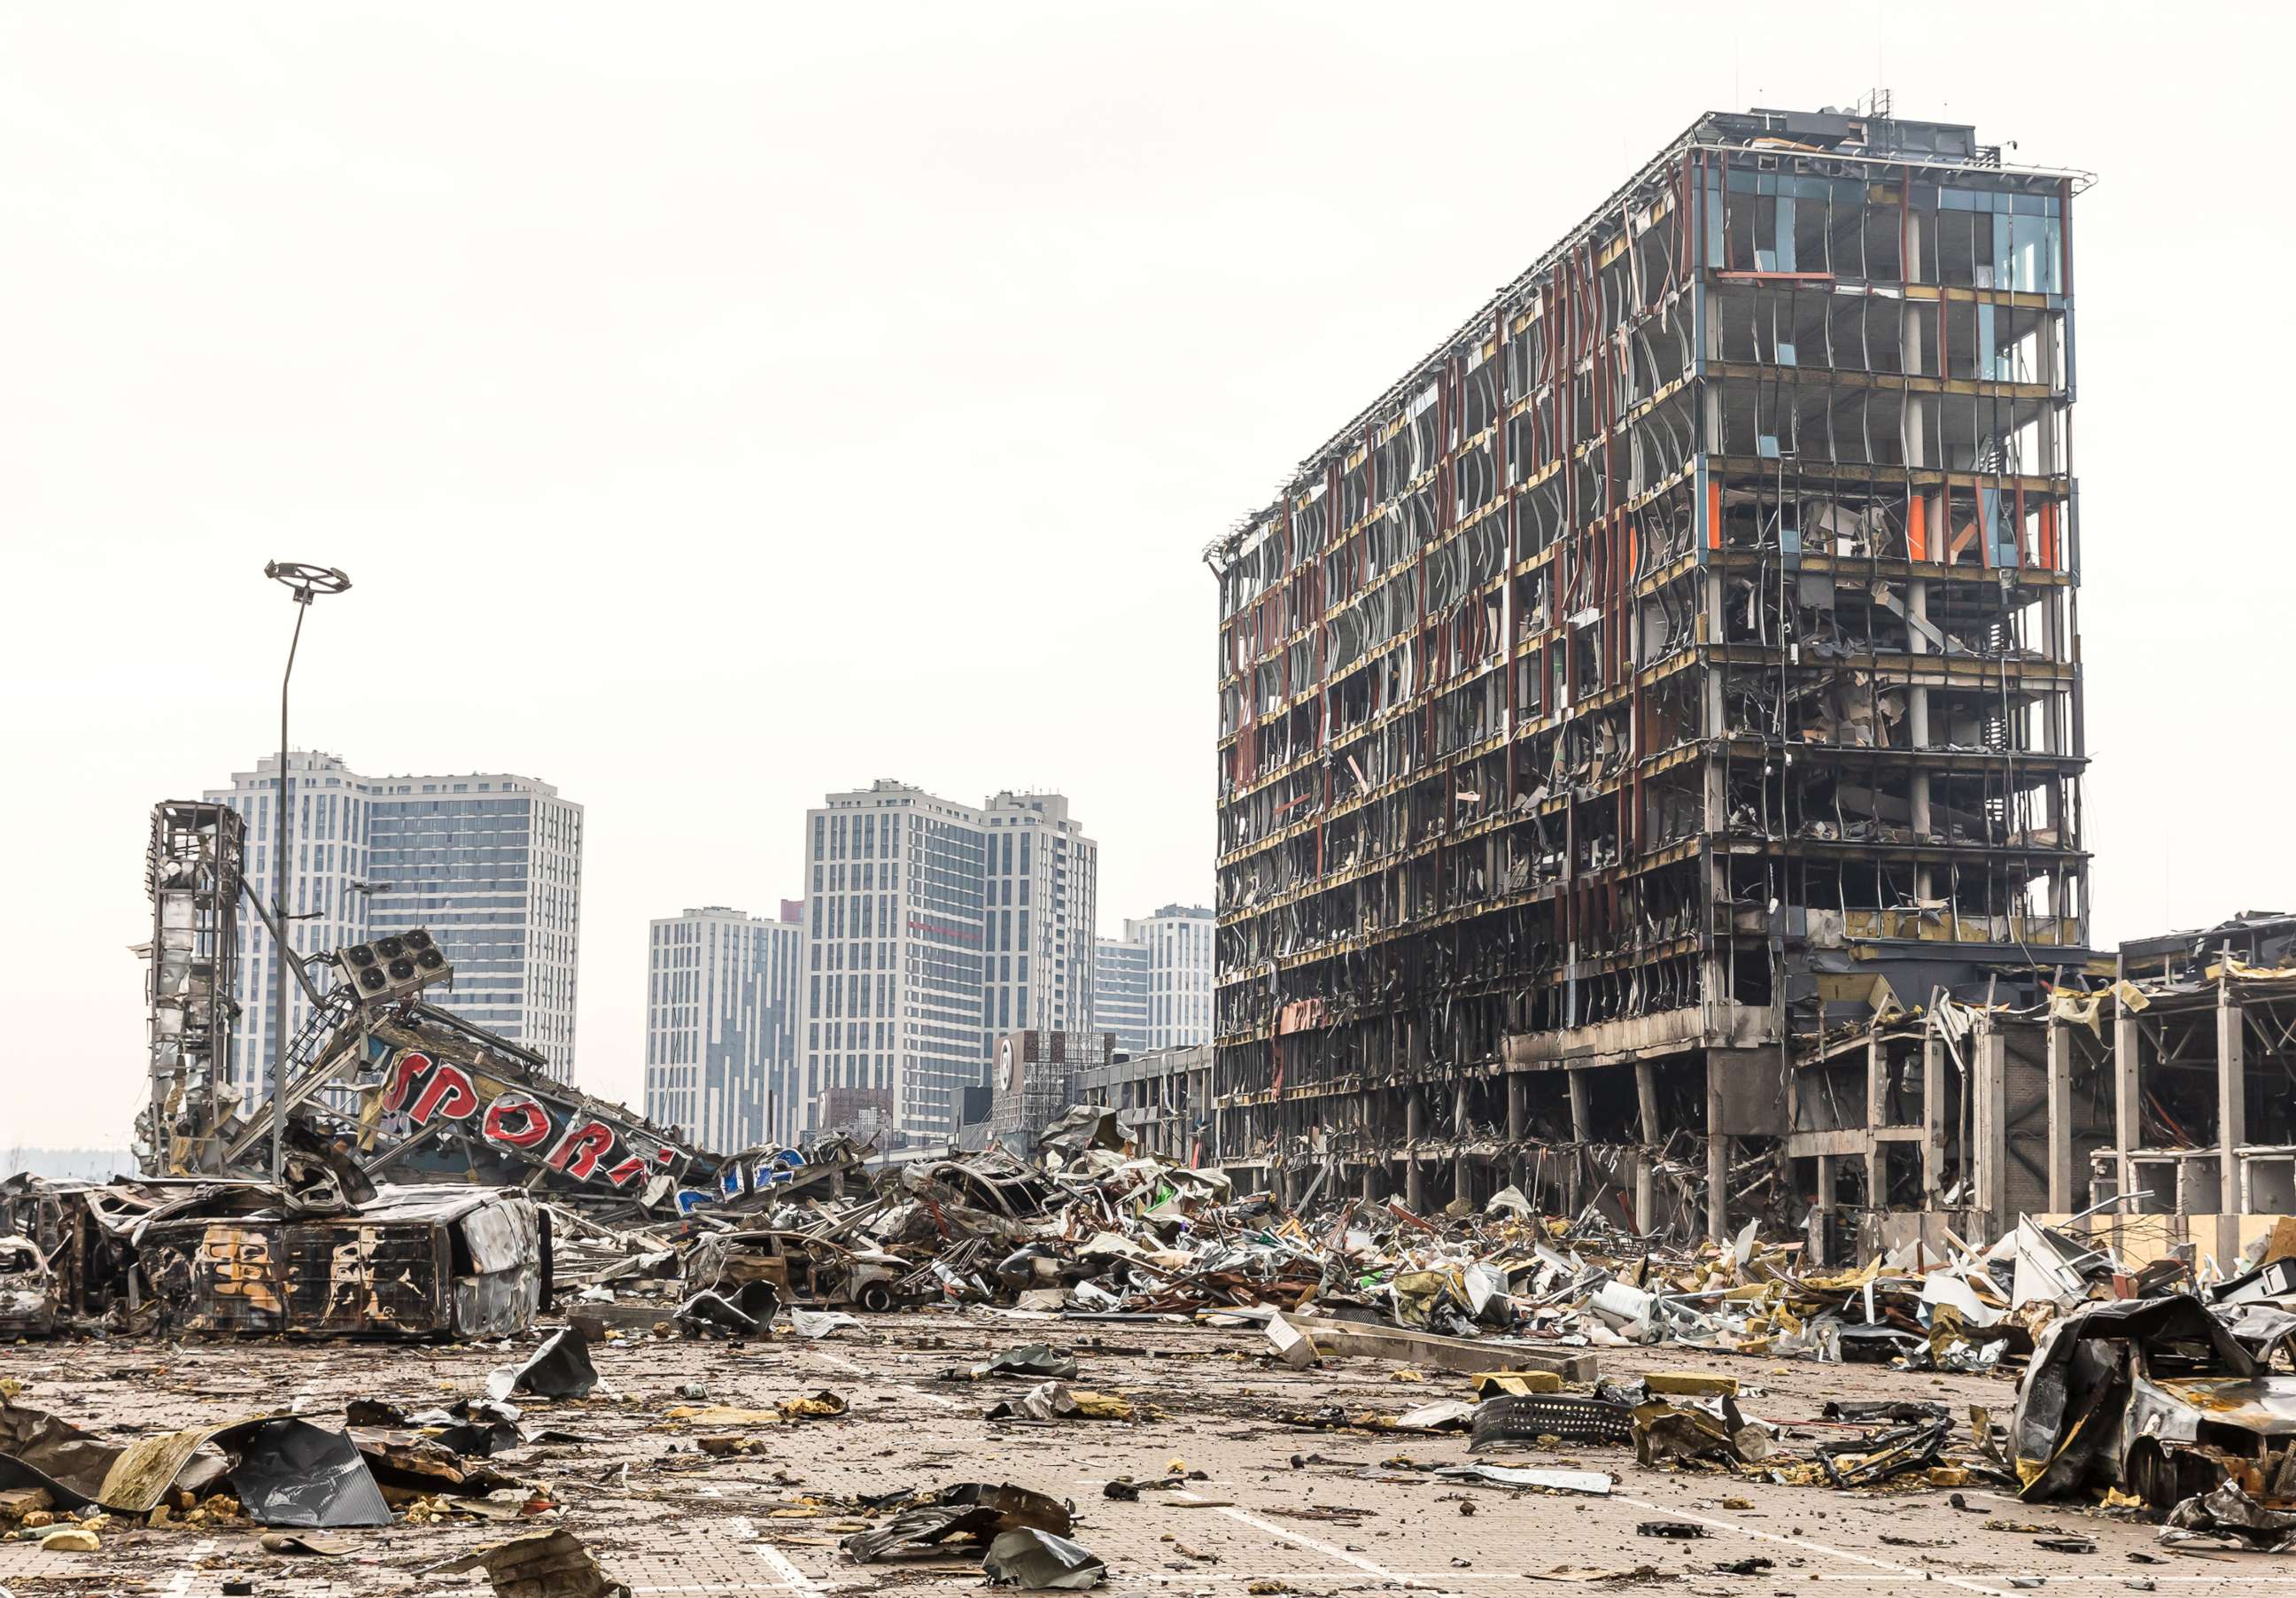 PHOTO: A destroyed shopping center is shown in Kyiv, Ukraine, March 29, 2022.